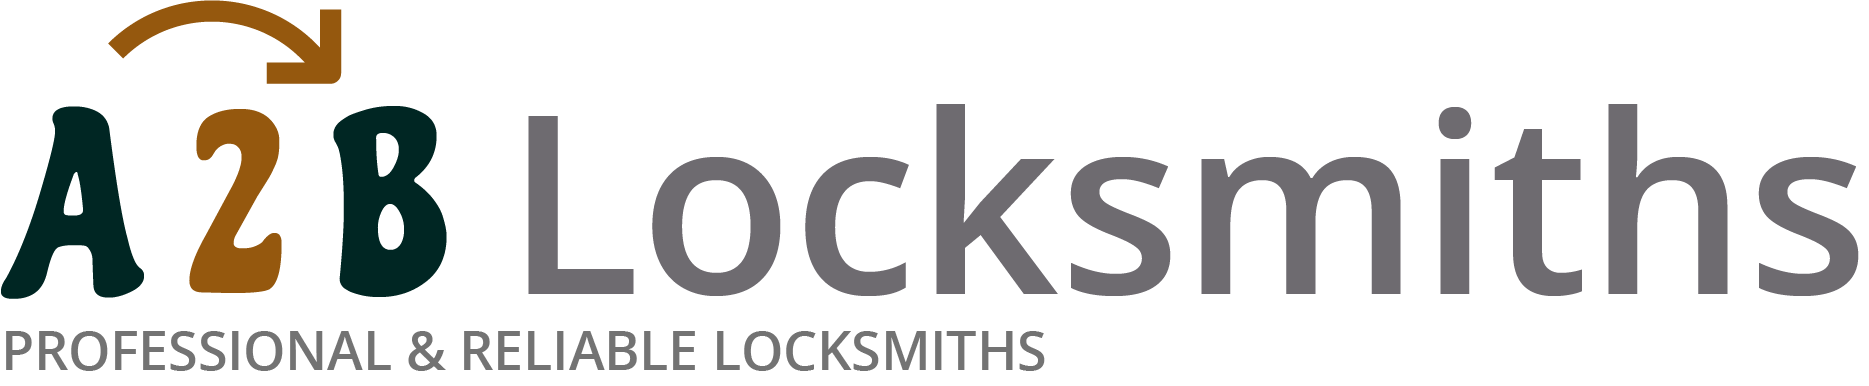 If you are locked out of house in Macclesfield, our 24/7 local emergency locksmith services can help you.